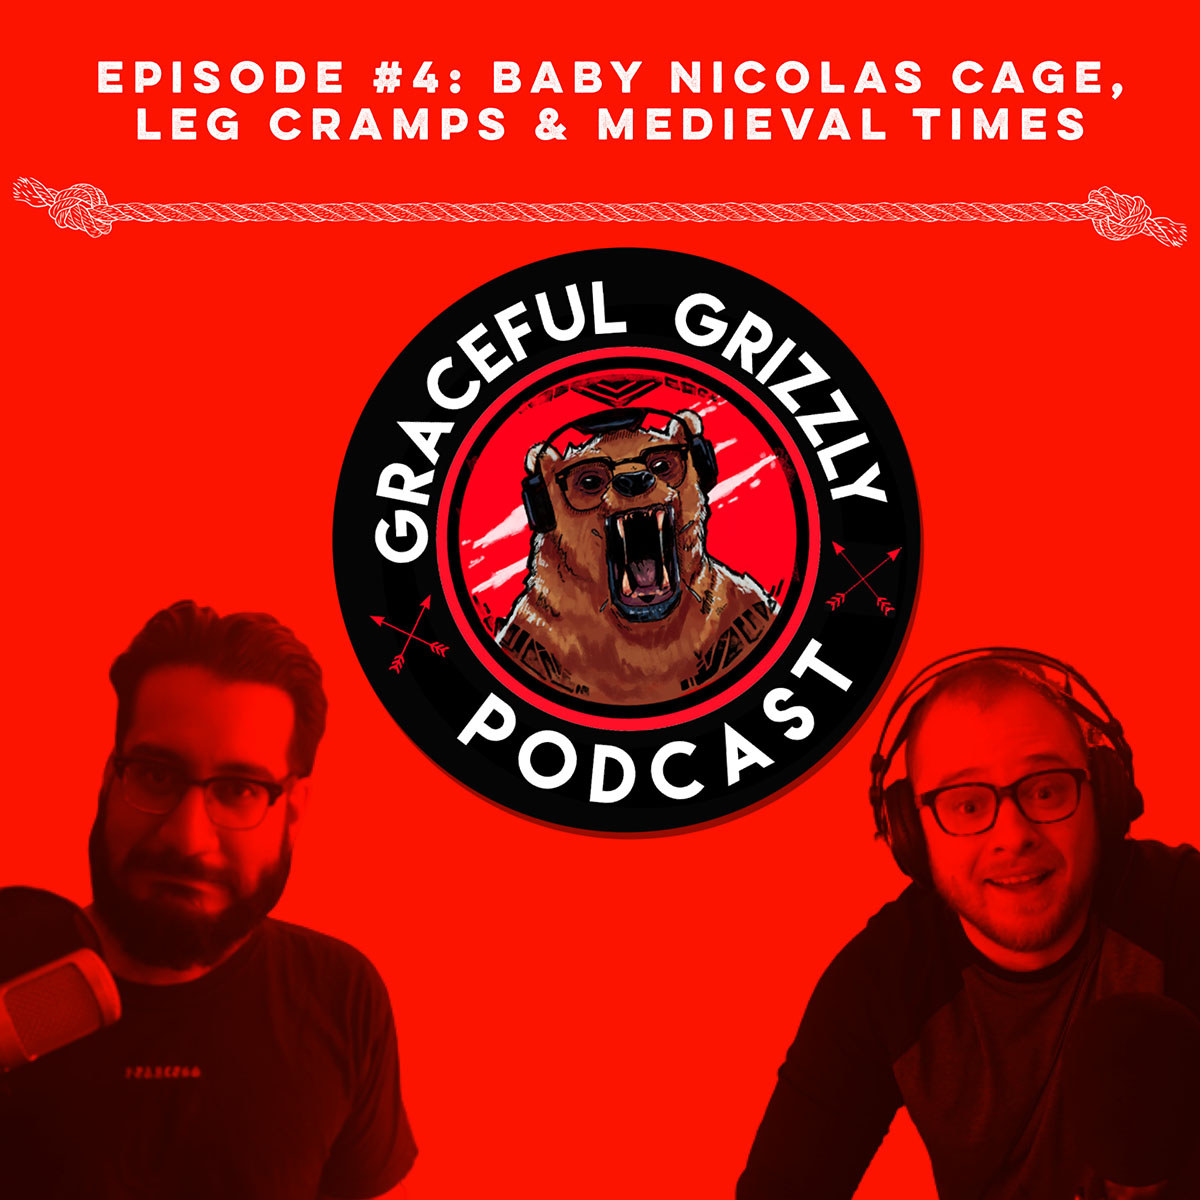 Episode 4 - Graceful Grizzly Podcast